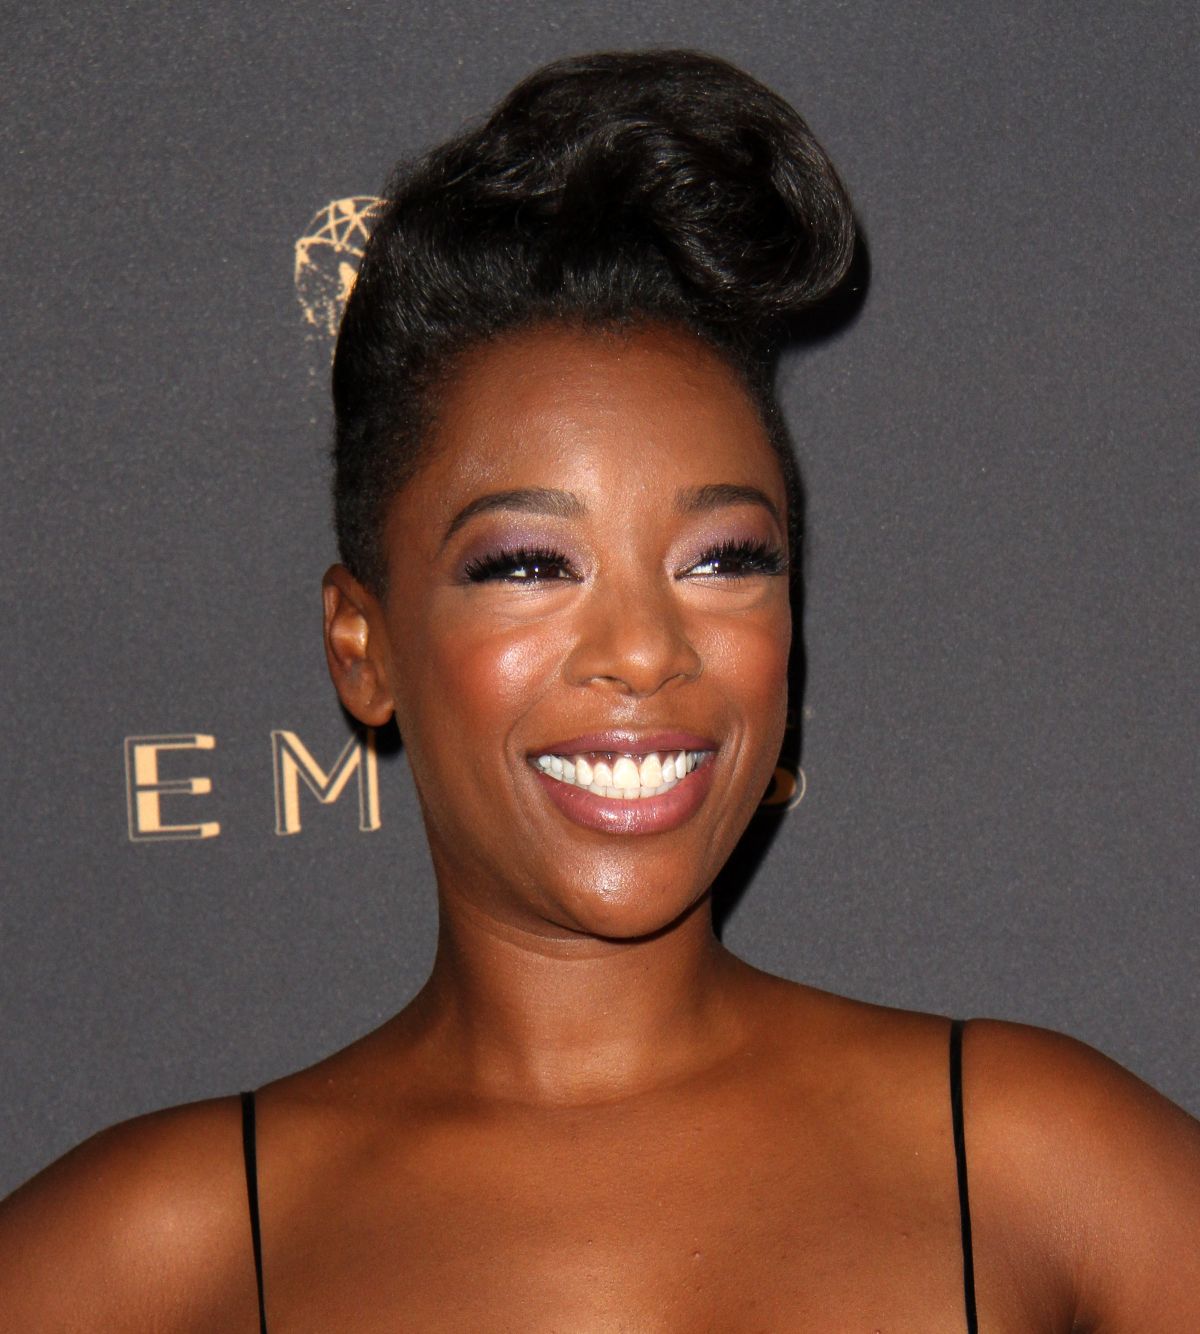 samira-wiley-at-television-academy-69th-emmy-performer-nominees-cocktail-reception-in-beverly-hills-09-15-2017_2.jpg